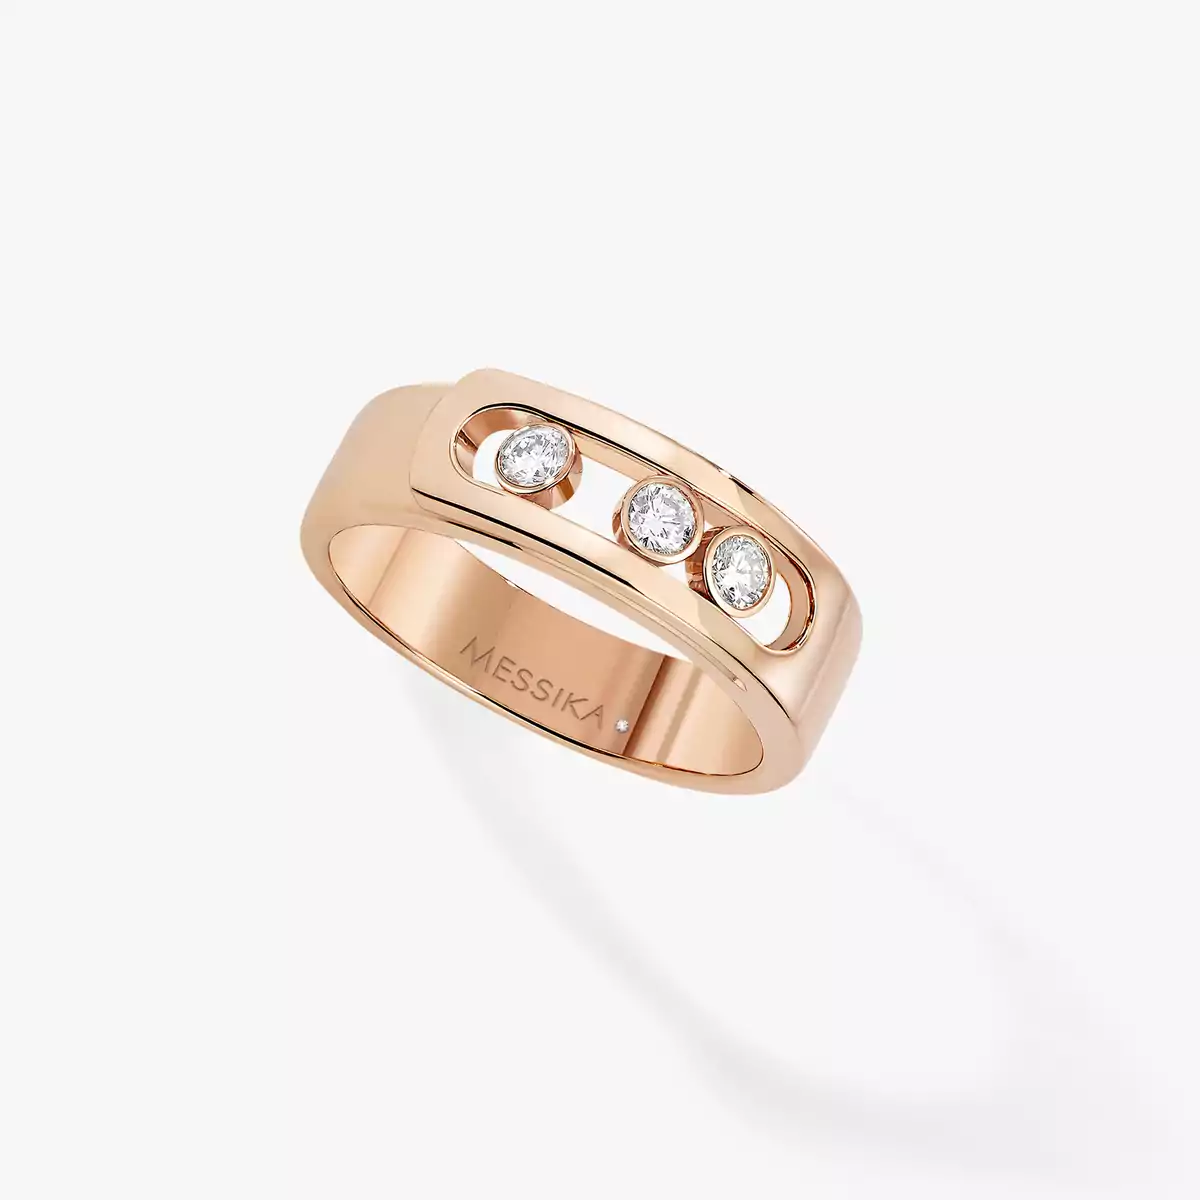 Move Noa Pink Gold For Her Diamond Ring 06262-PG